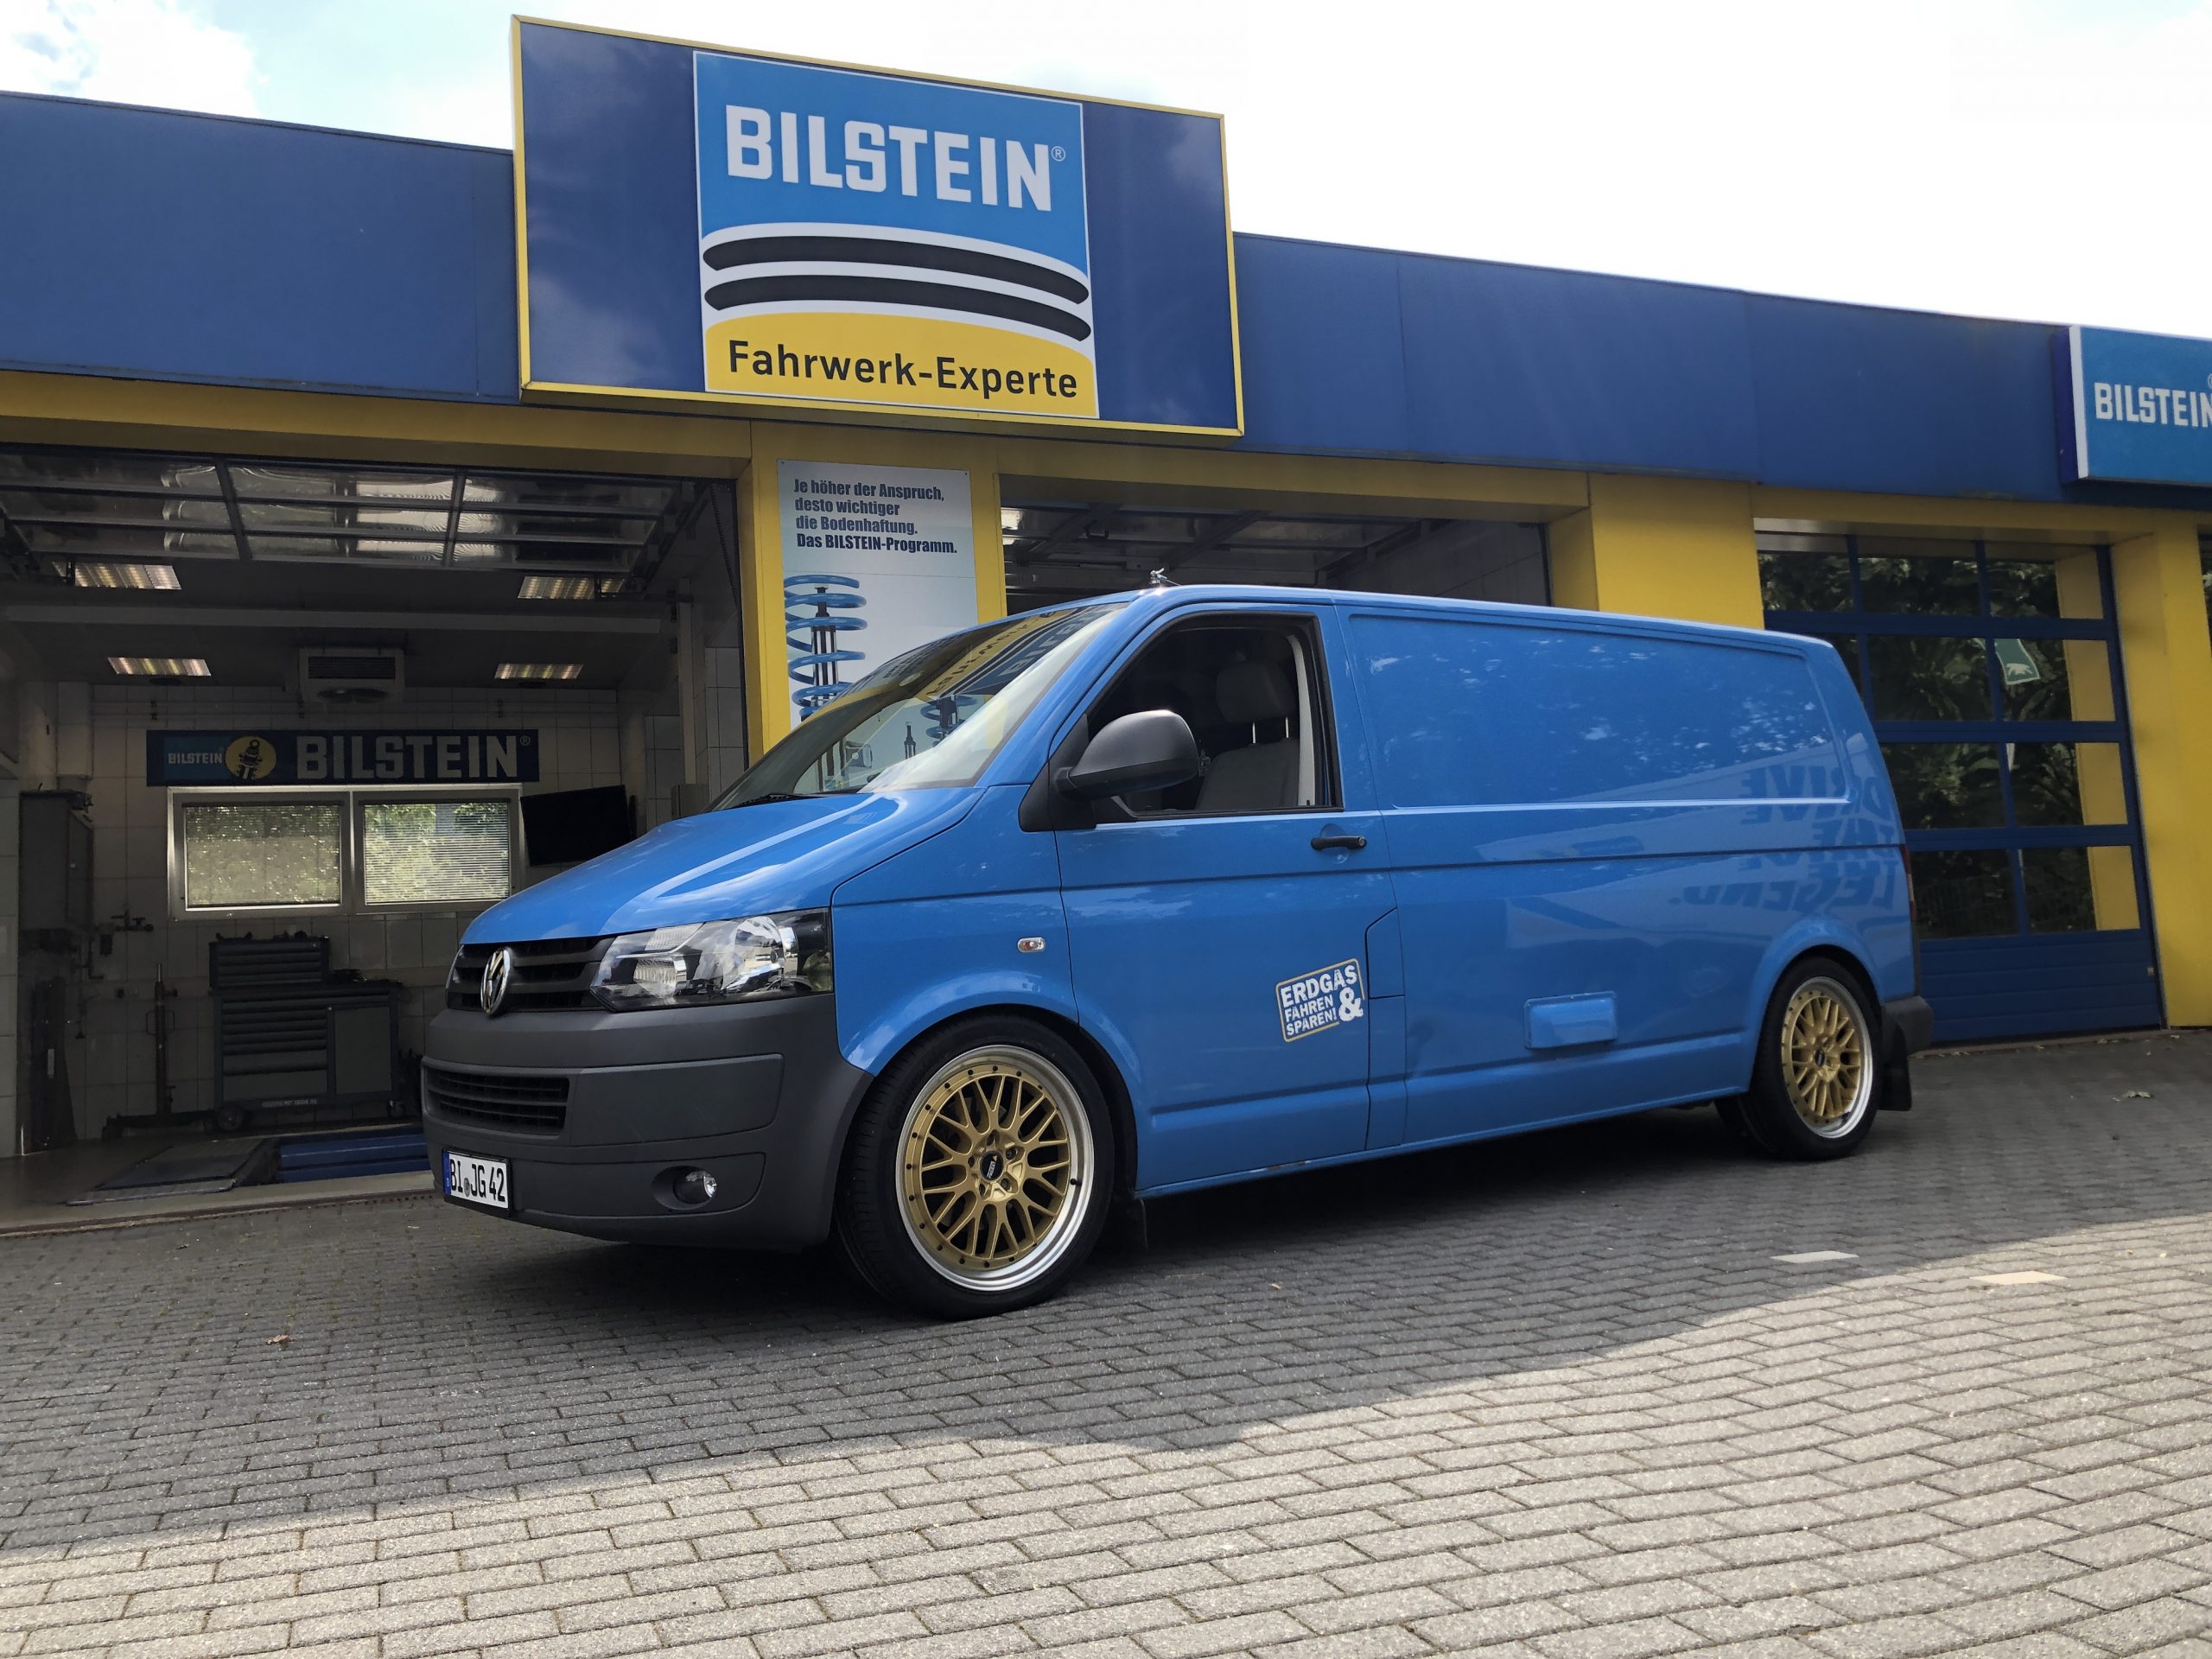 VW Transporter T5 with dimensions